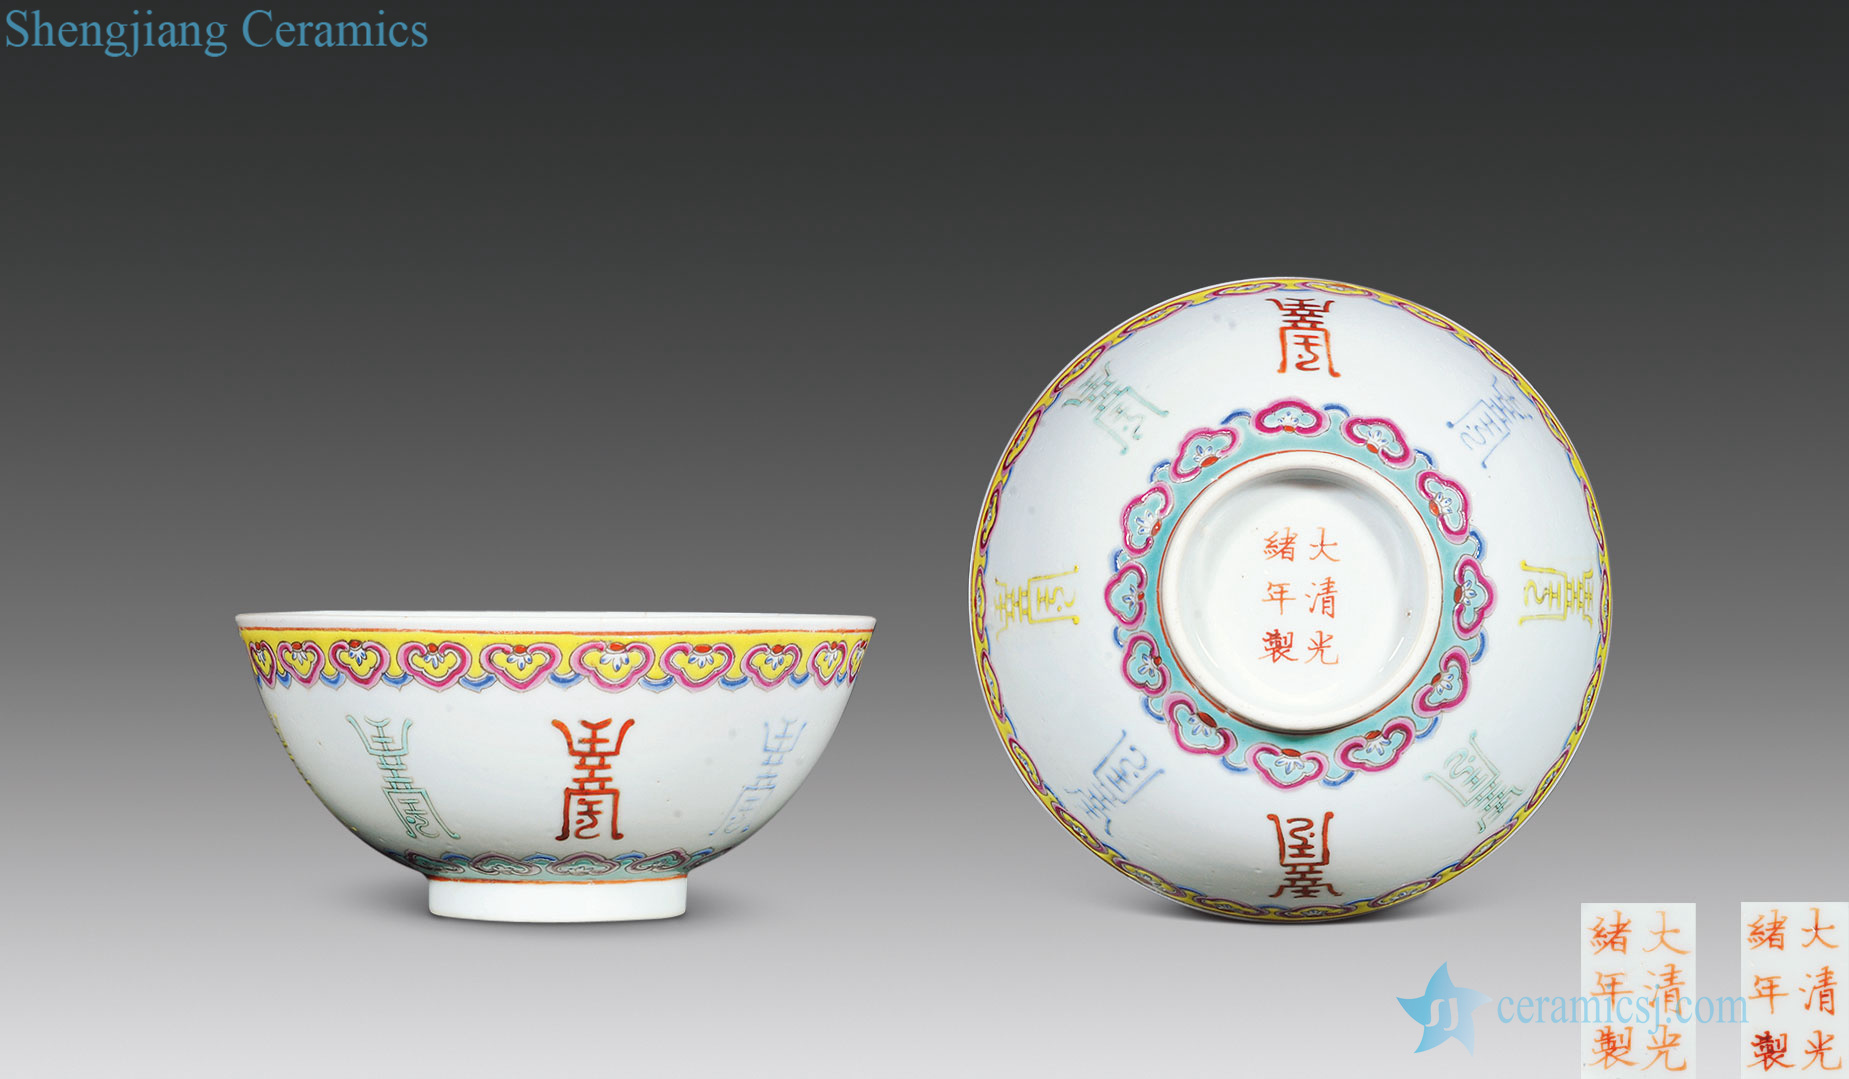 Pastel reign of qing emperor guangxu (a) life of the bowls